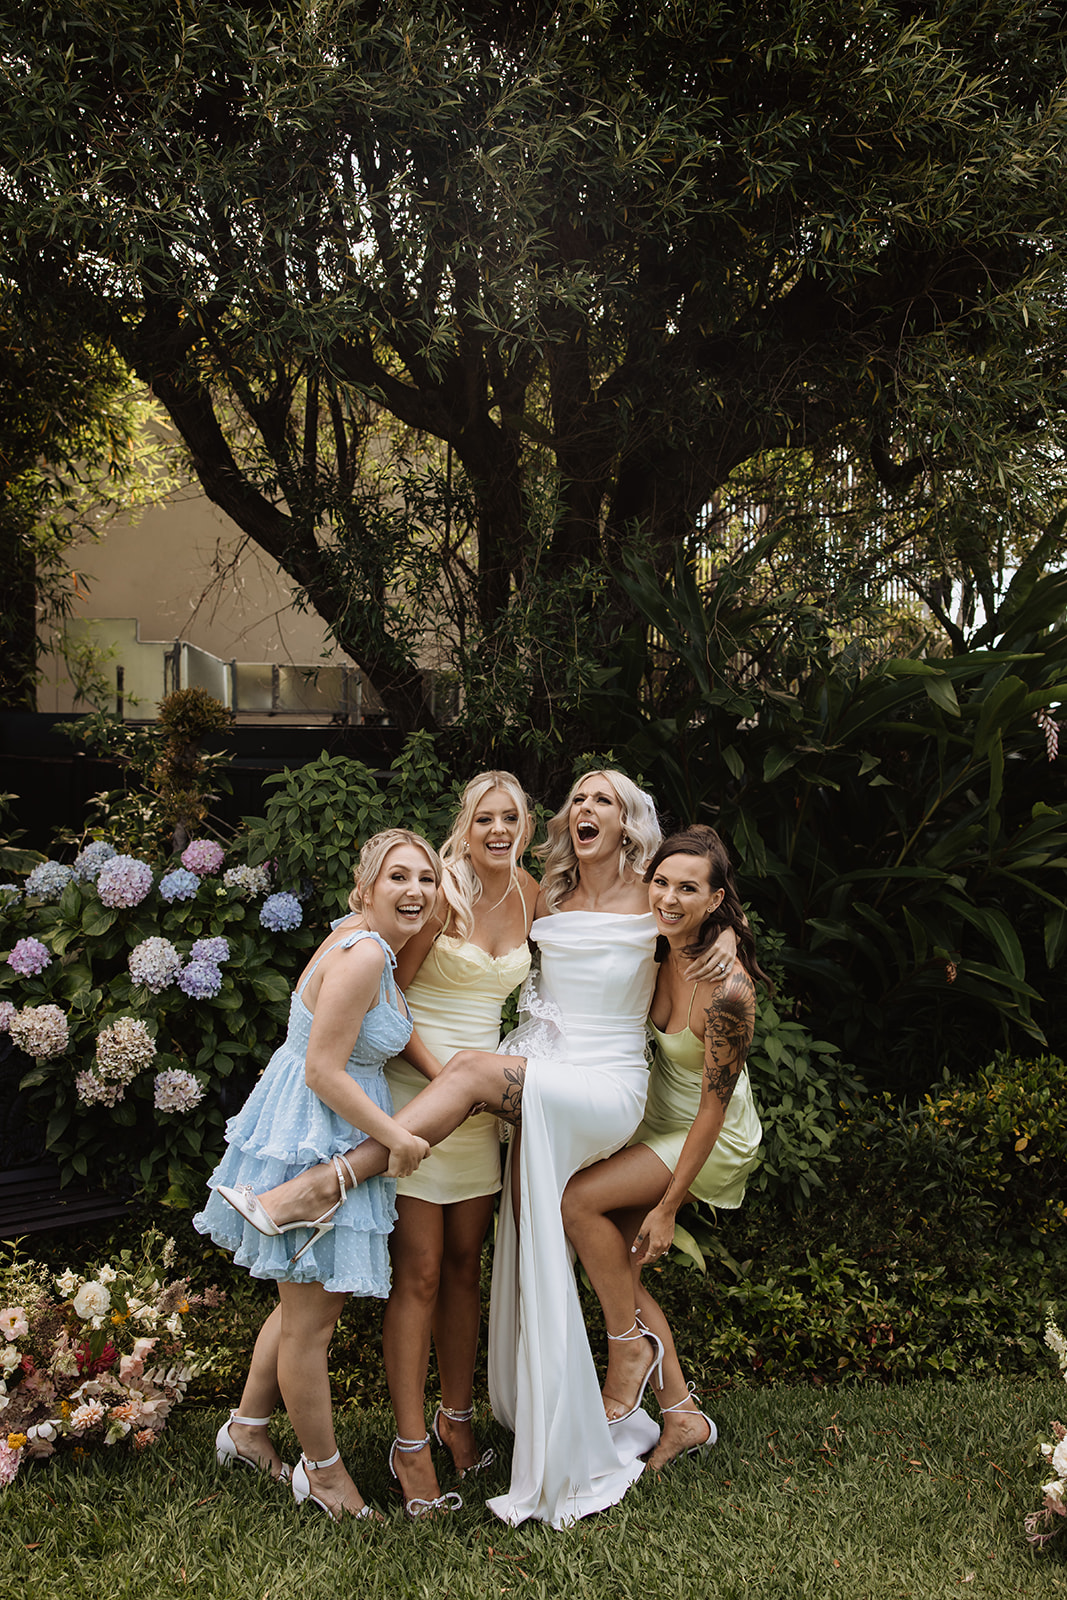 Bride and bridesmaids at the Wedding in Lindesay House, Darling Point New South Wales